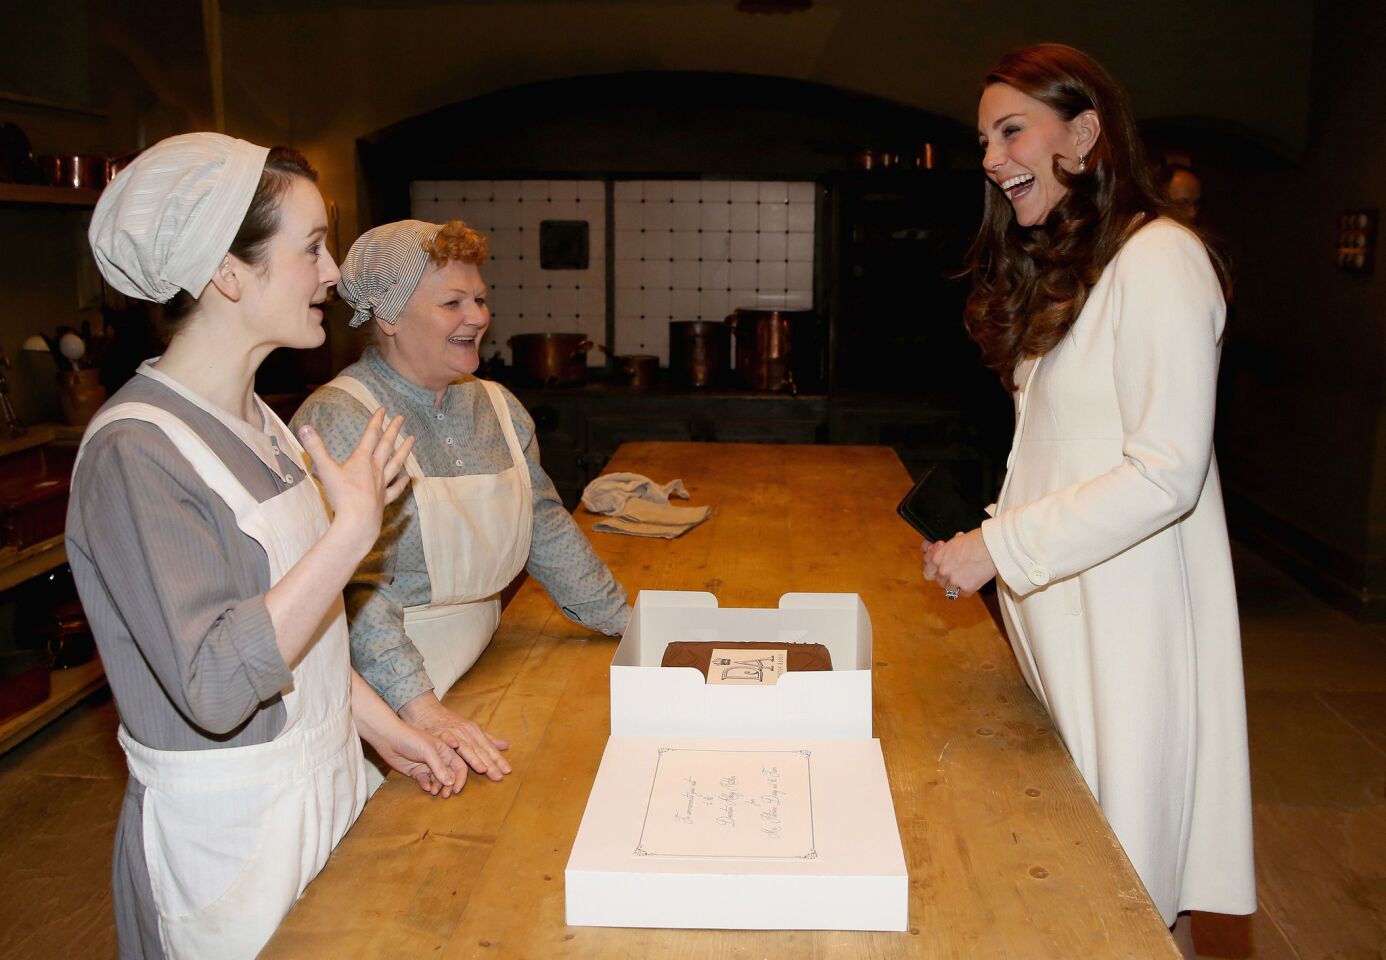 The duchess visits Downton's kitchens and speaks with actresses Sopie McShera, right, and Lesley Nicol, center, who play kitchen servants Daisy and chef Mrs. Patmore, respectively